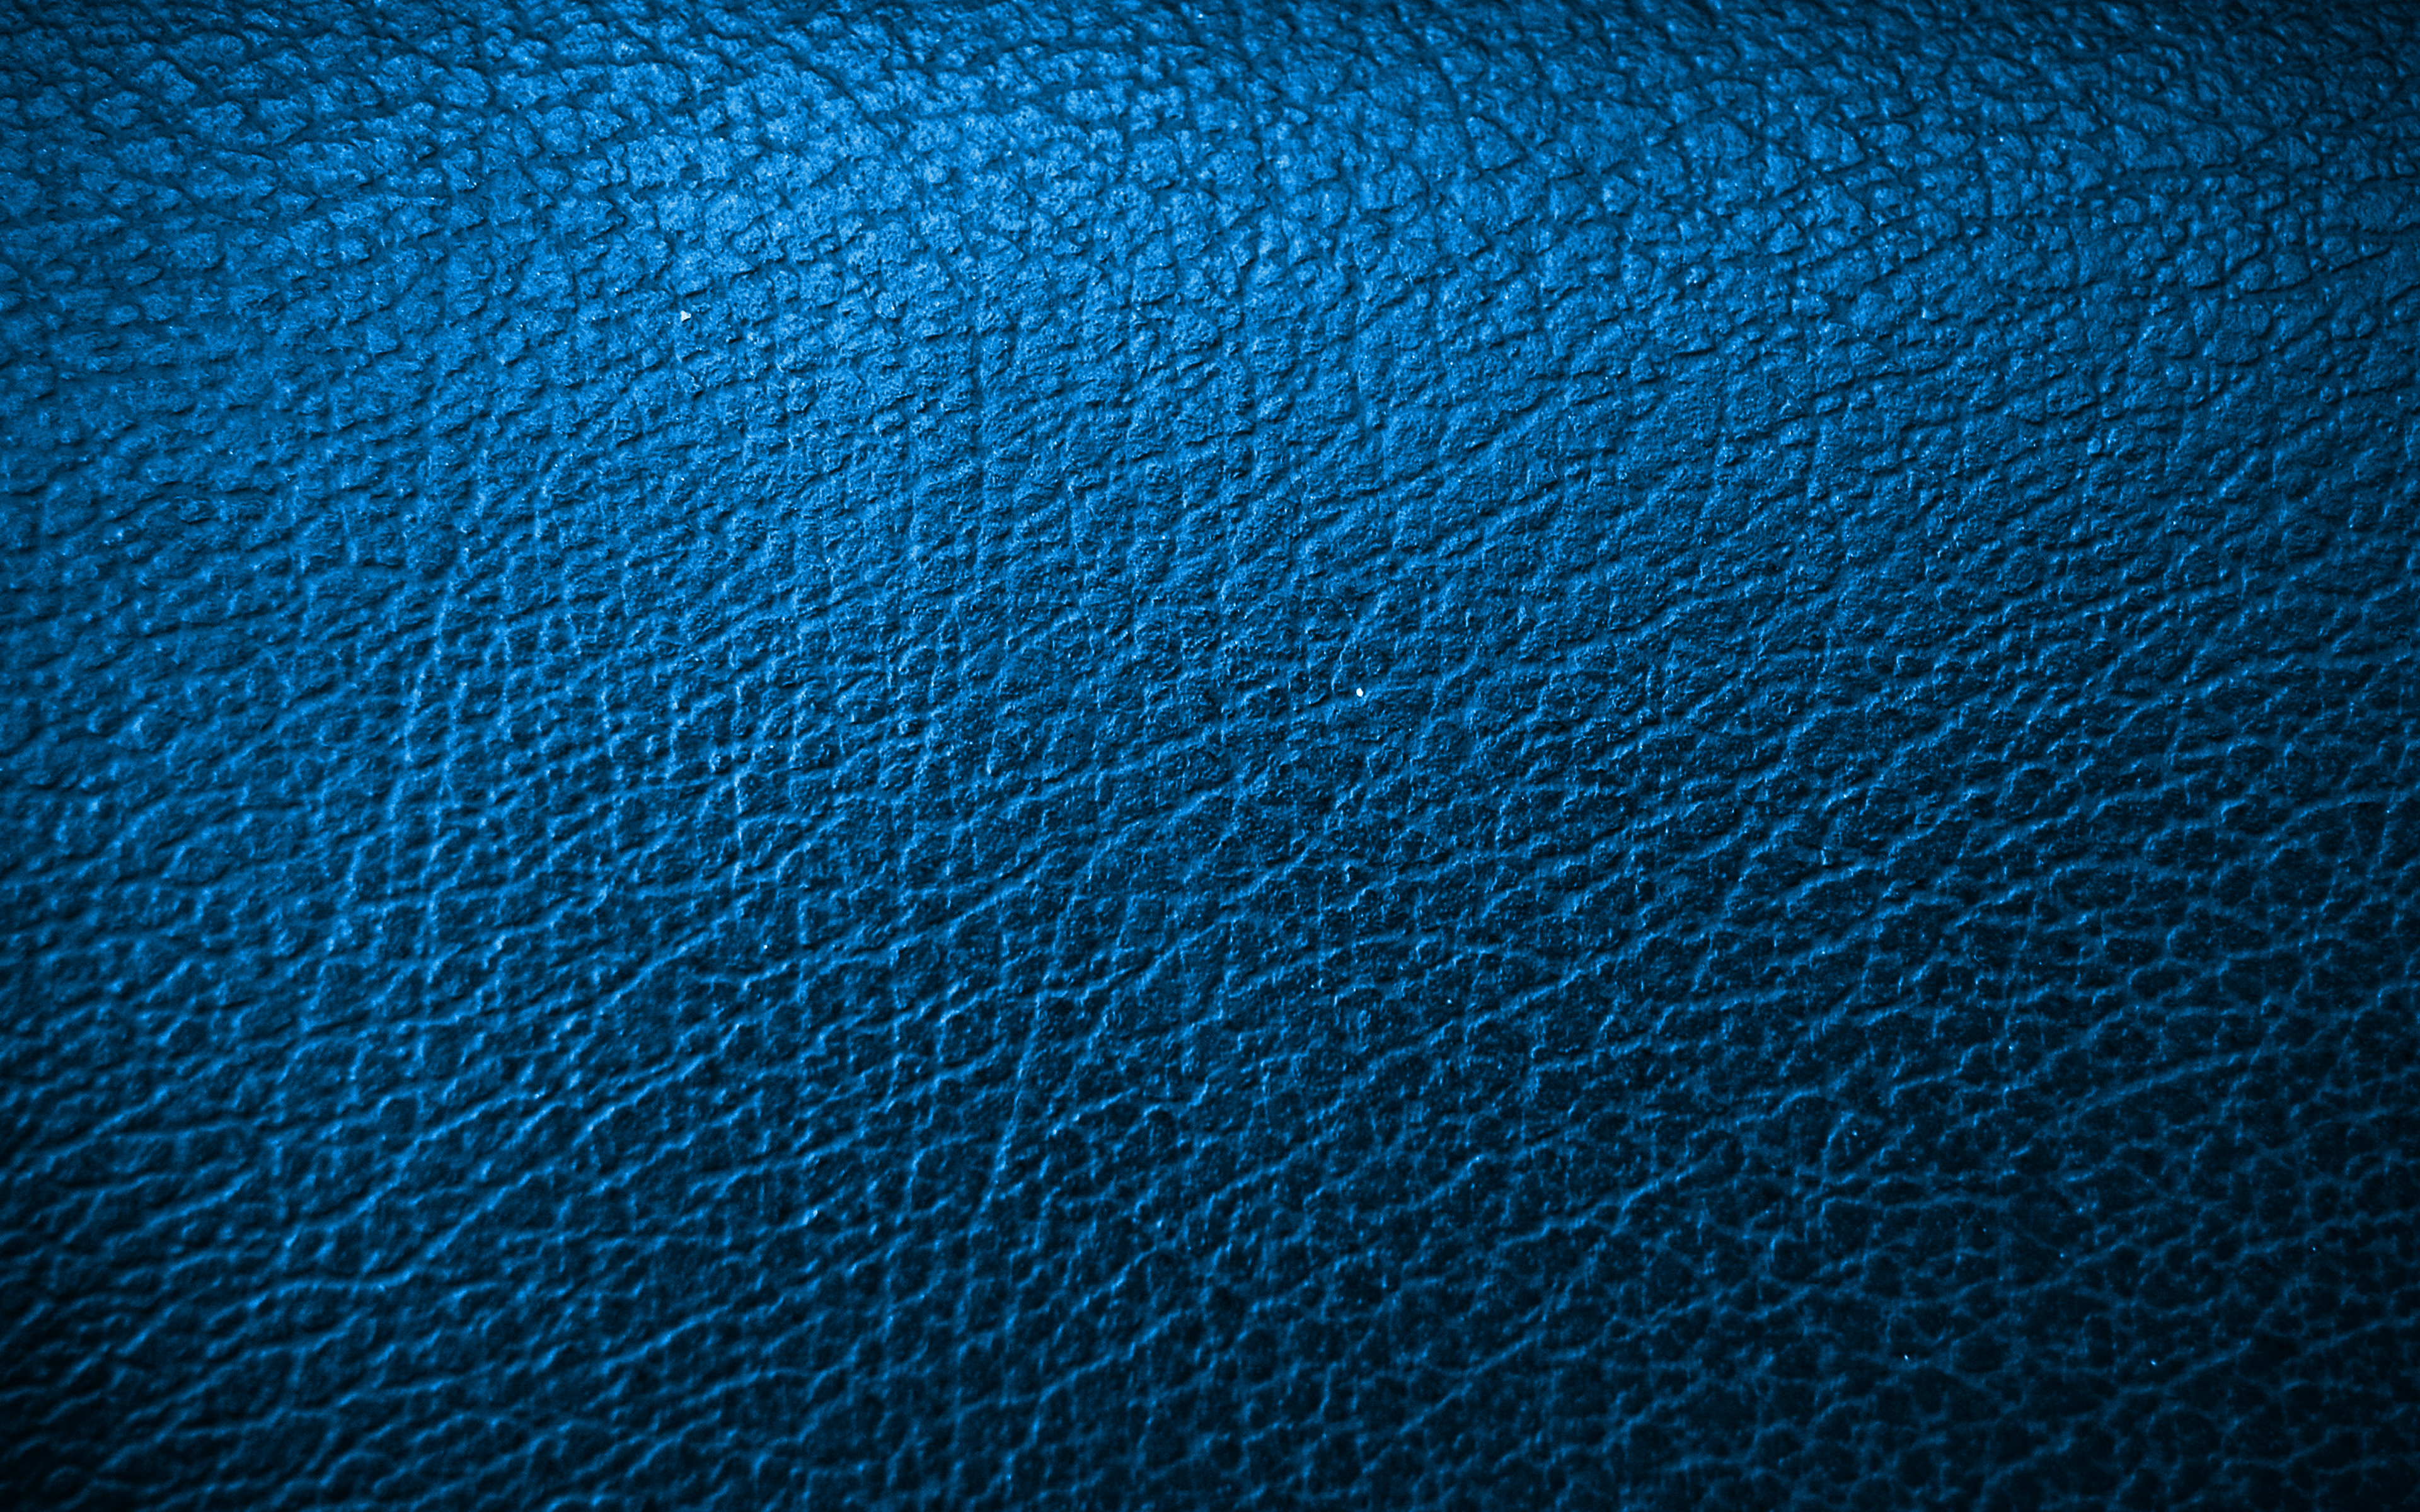 Download wallpaper blue leather background, 4k, leather patterns, leather textures, turquoise leather texture, blue background, leather background, macro, leather for desktop with resolution 3840x2400. High Quality HD picture wallpaper